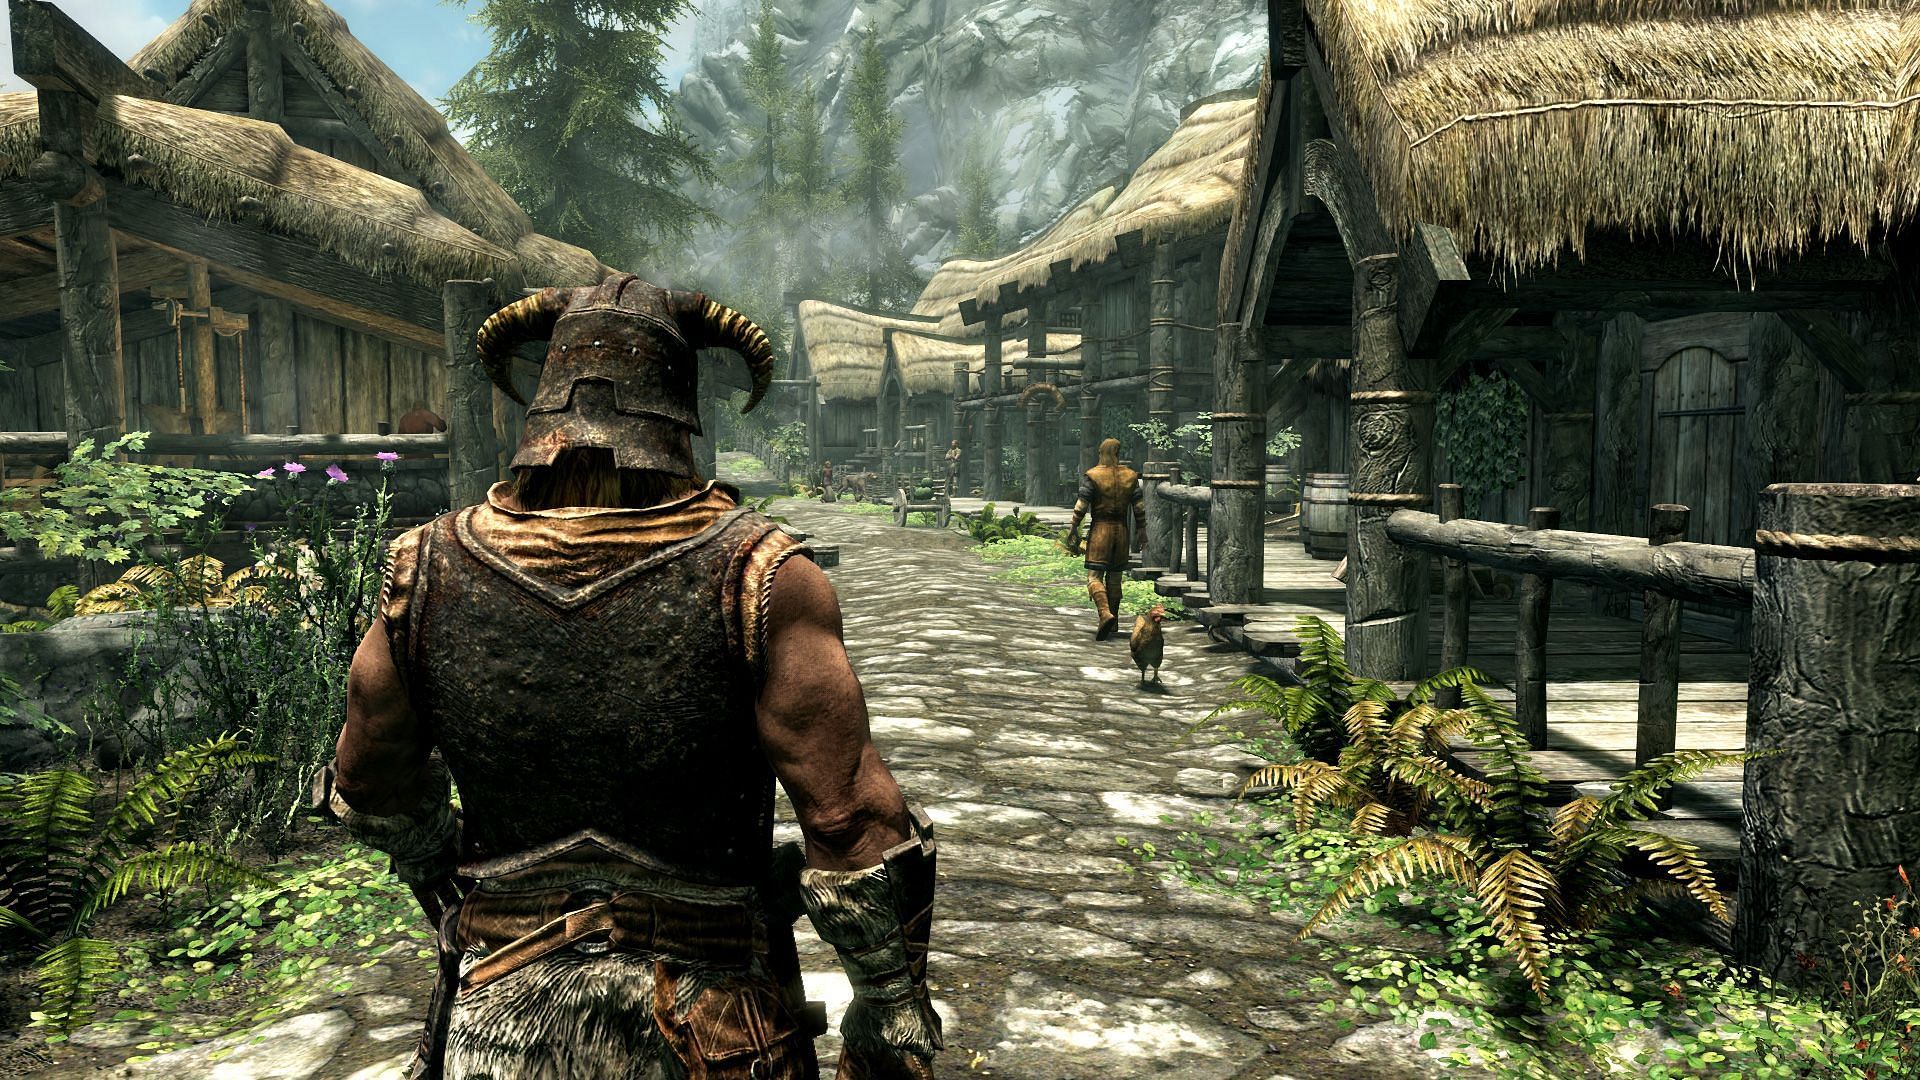 Skyrim has a diverse range of mods, but managing them can be an arduous task (Image via Steam)